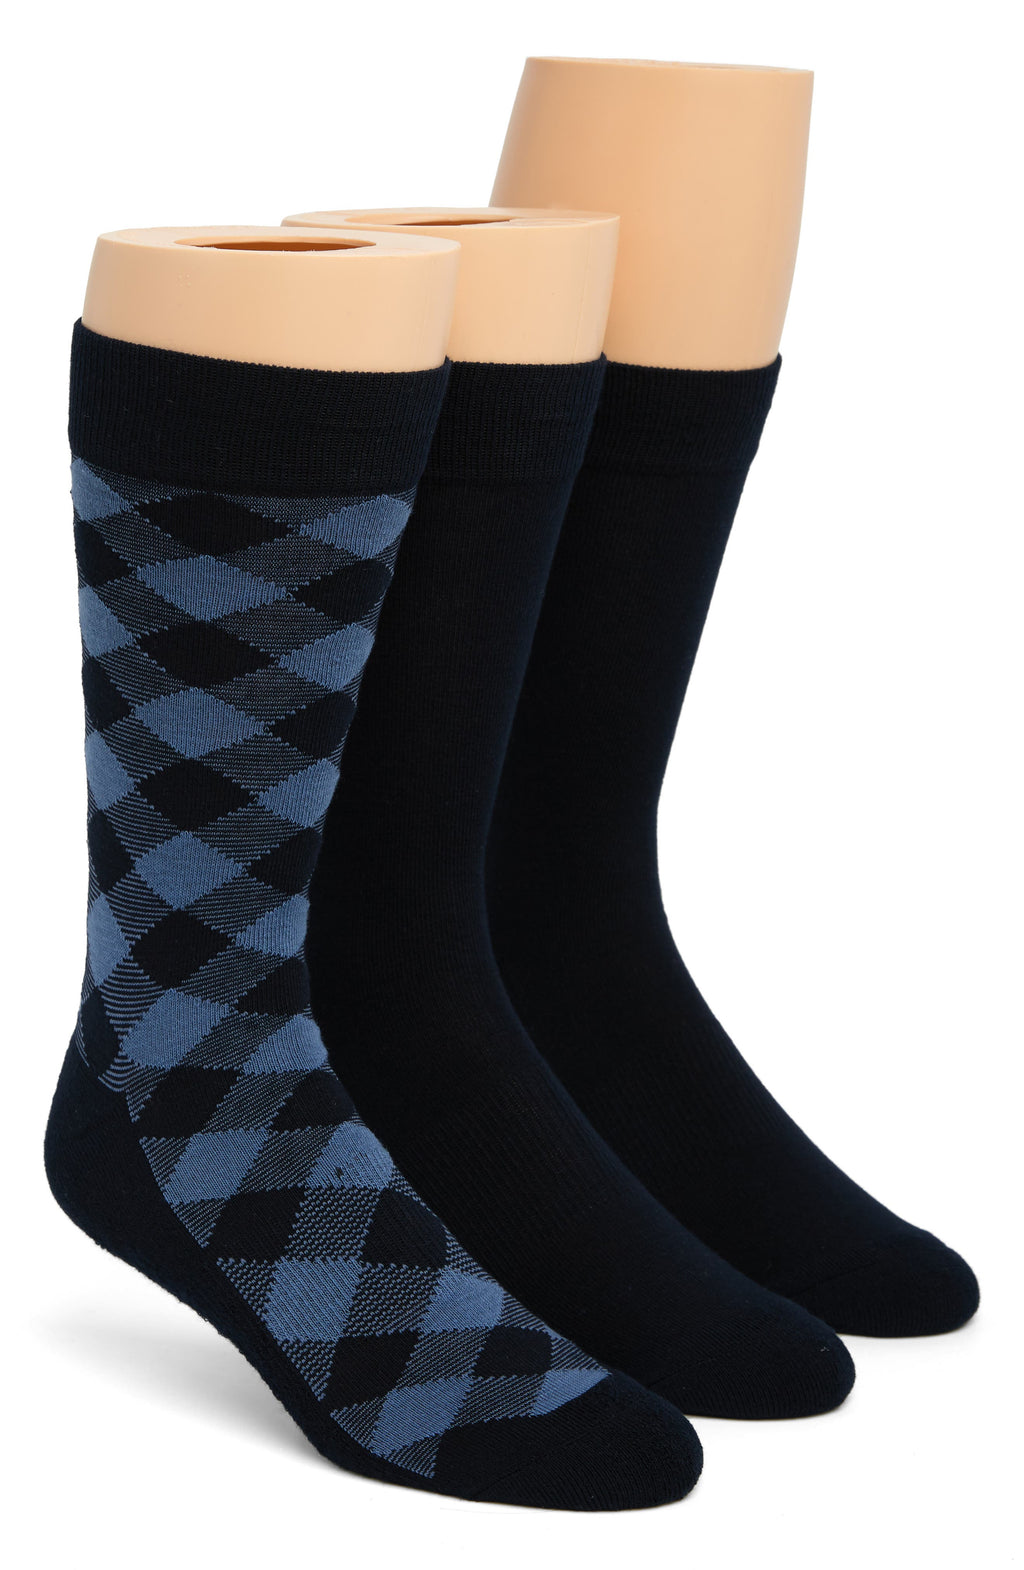 NORDSTROM RACK Cushioned Patterned Crew Socks - Pack of 3, Main, color, BLUE BUFFALO CHECK